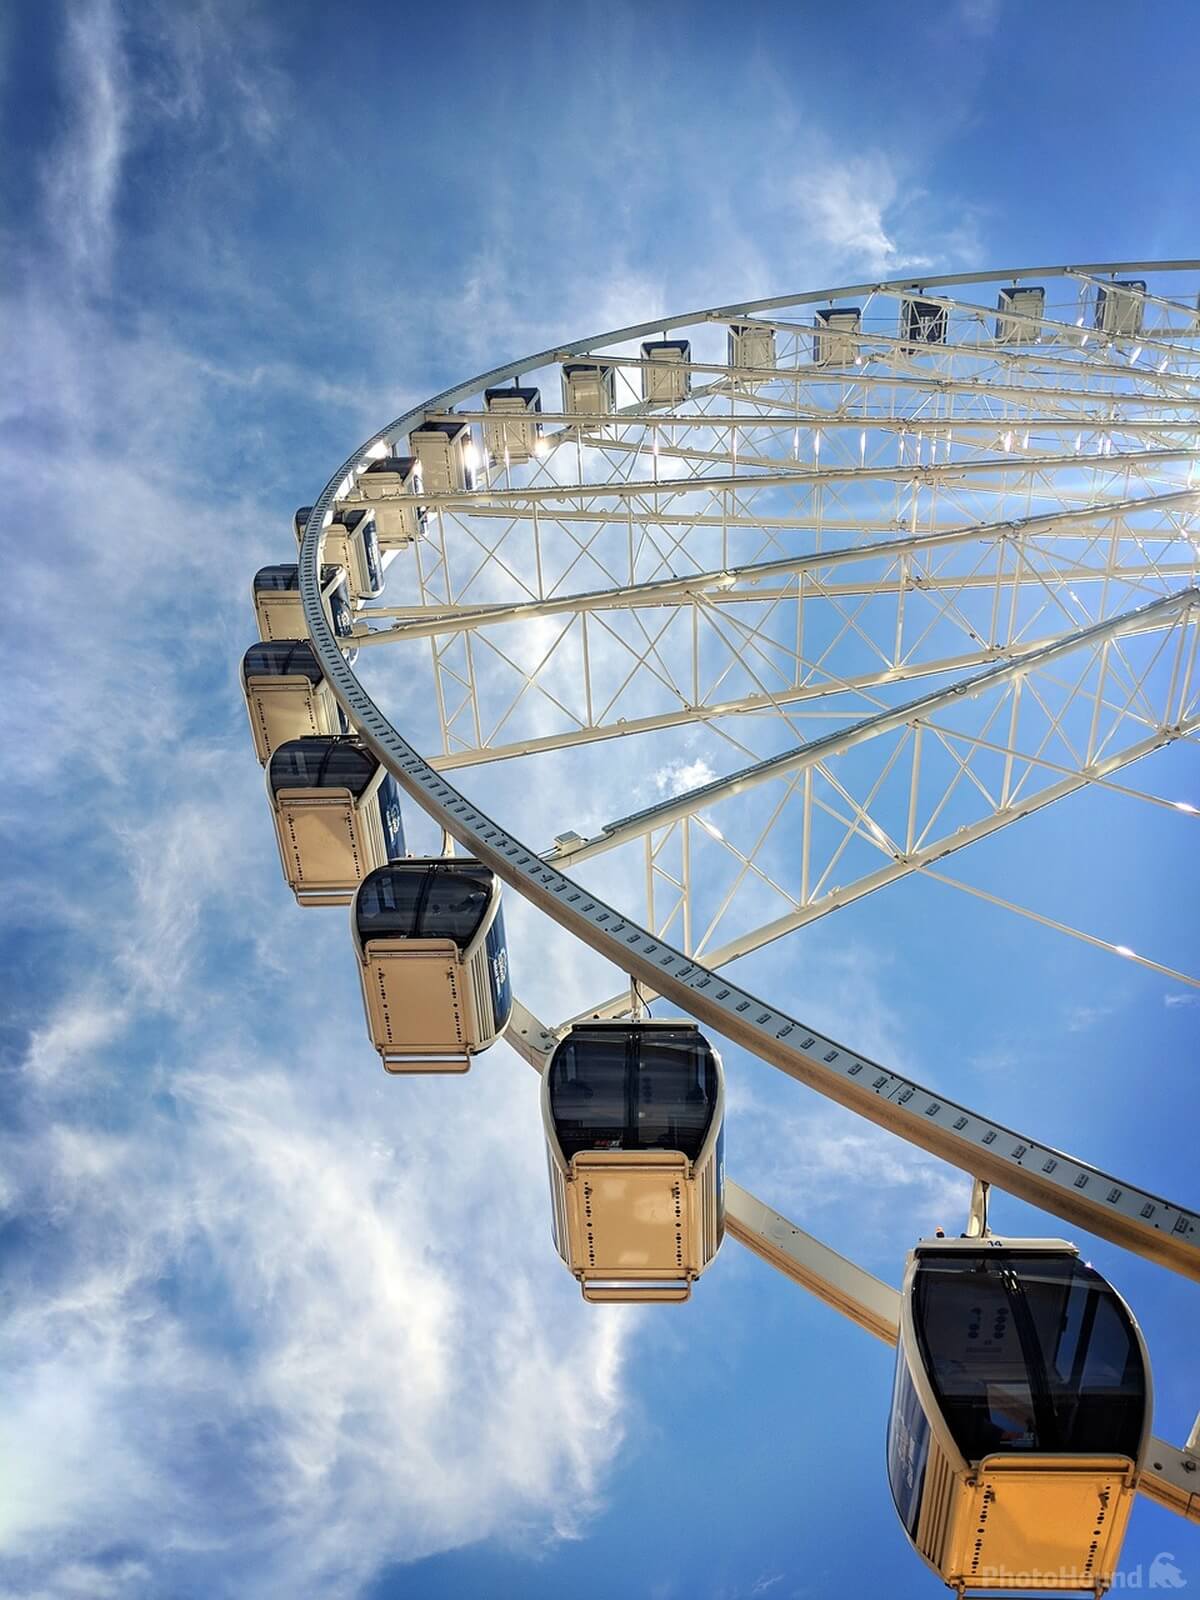 Image of The Great Wheel by Team PhotoHound